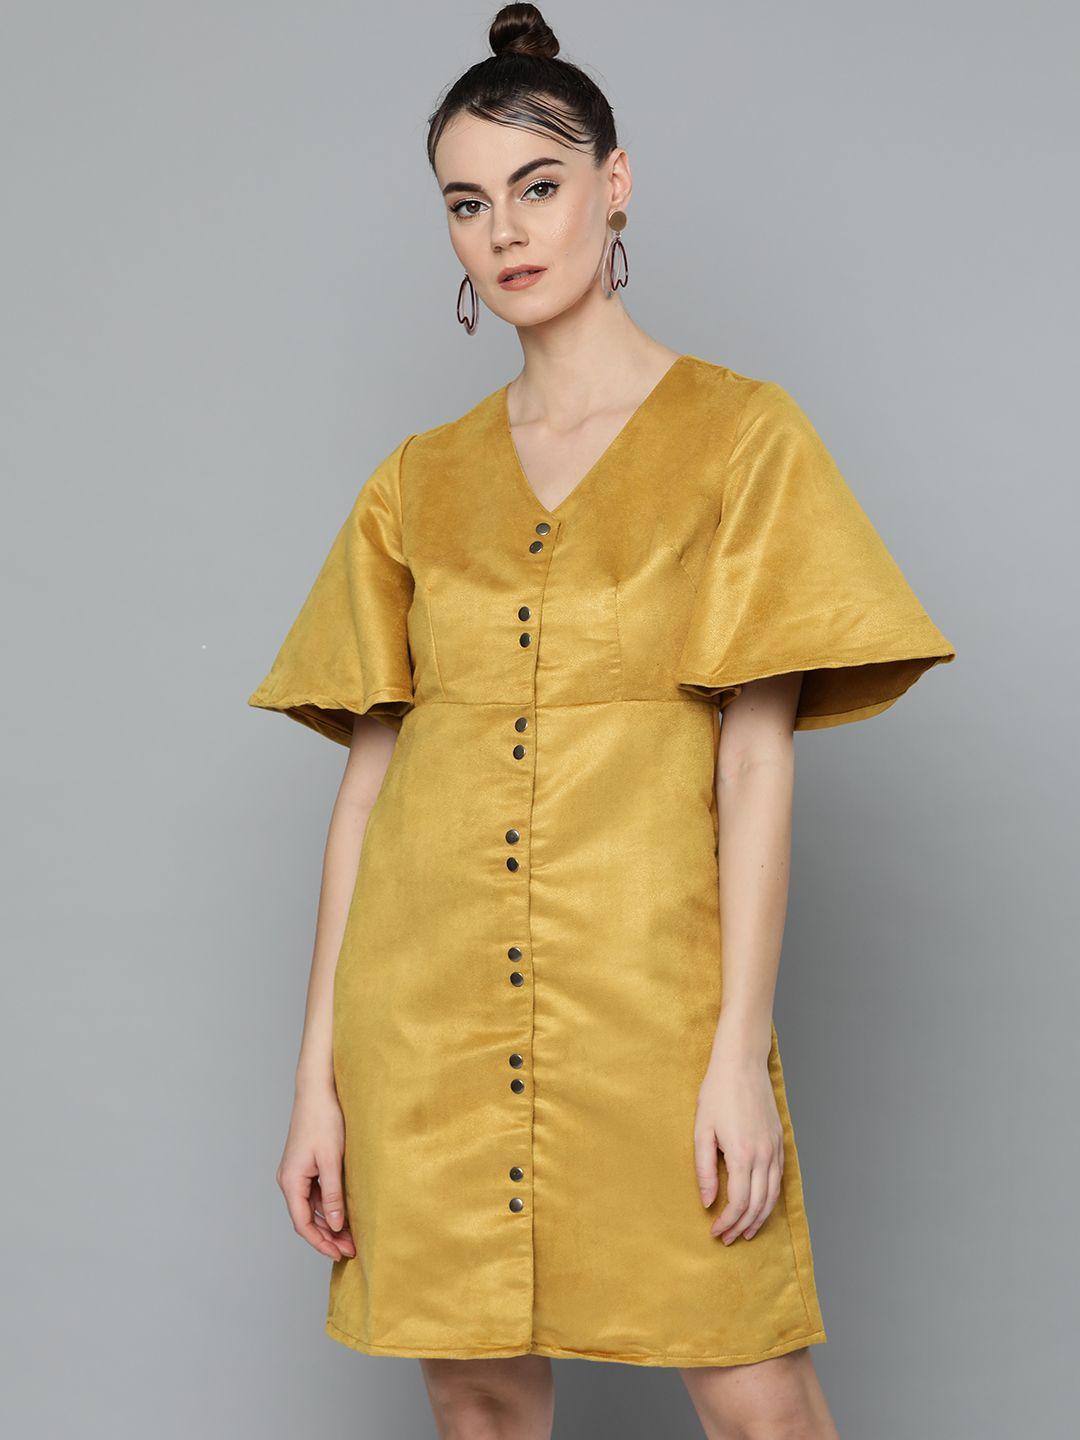 marie claire women mustard yellow solid a-line dress with suede finish